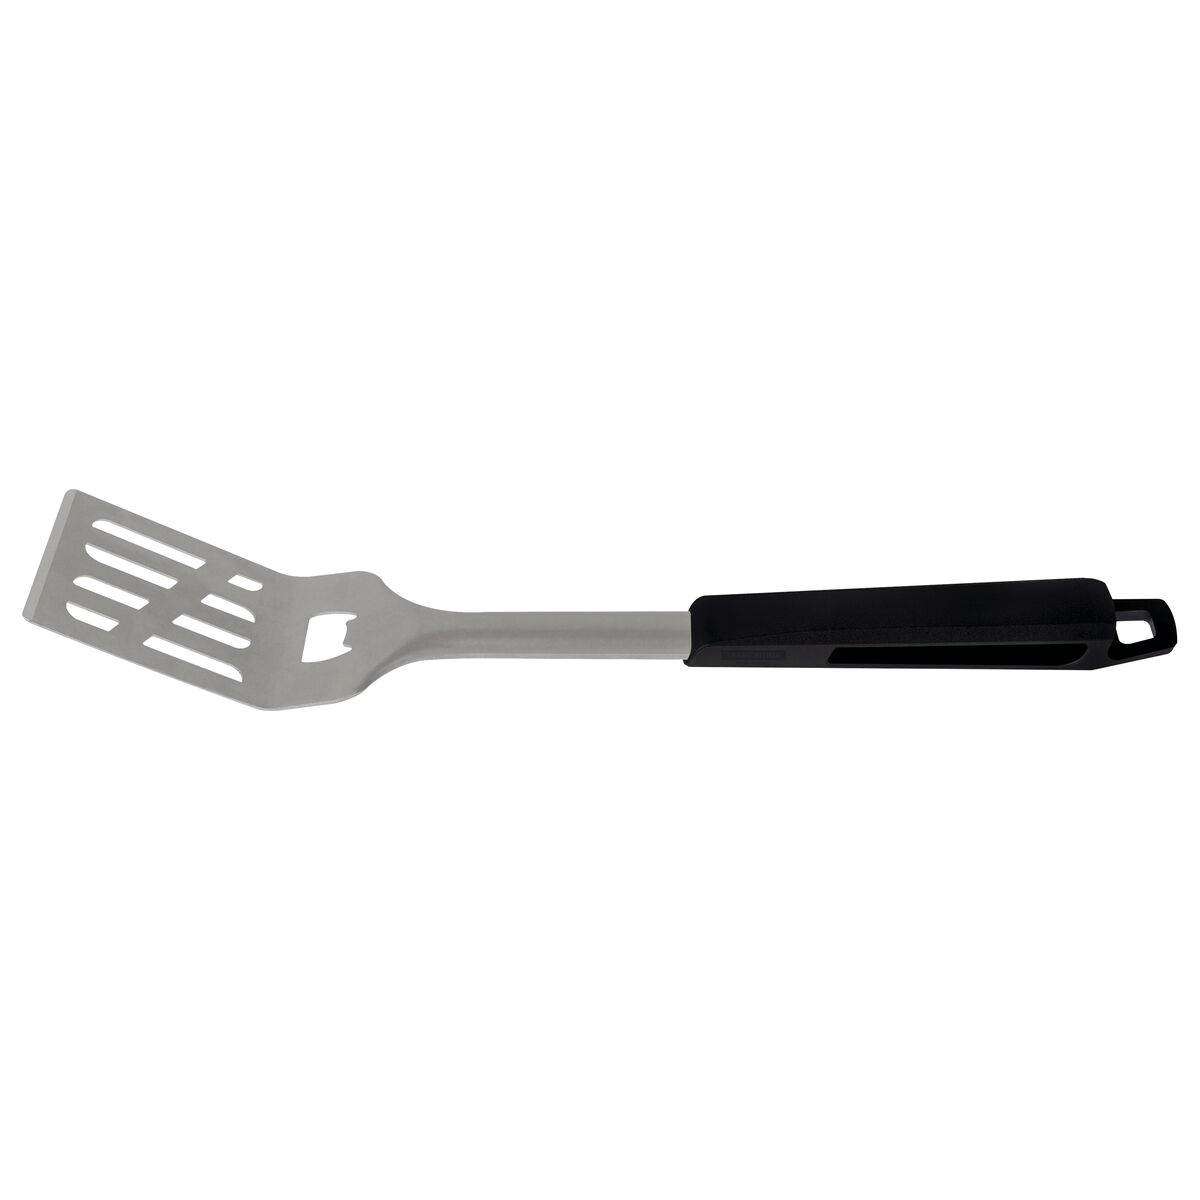 Tramontina Churrasco Black Spatula with a Stainless Steel Blade and Black Polypropylene Handle with a Bottle Opener